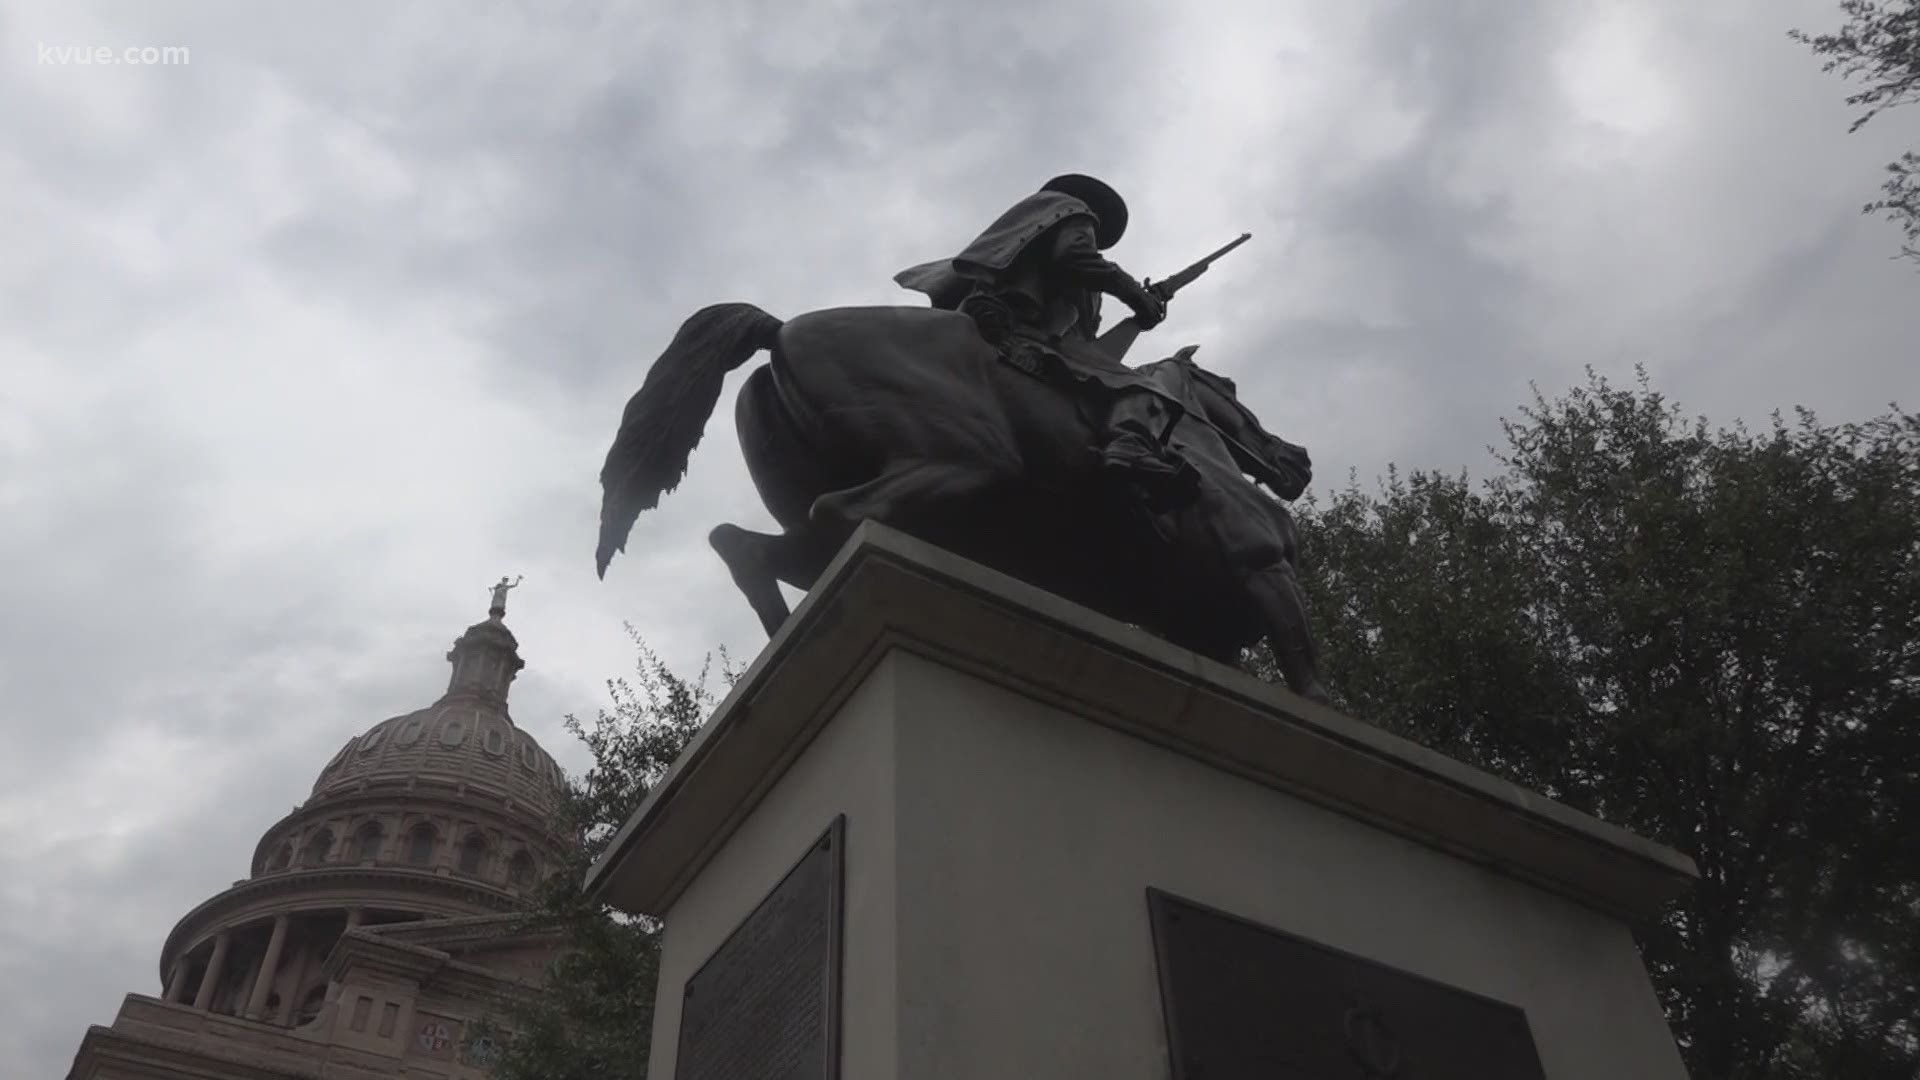 A new Texas bill this legislative session seeks the removal of Confederate monuments from state Capitol grounds. KVUE talks its chance for approval.